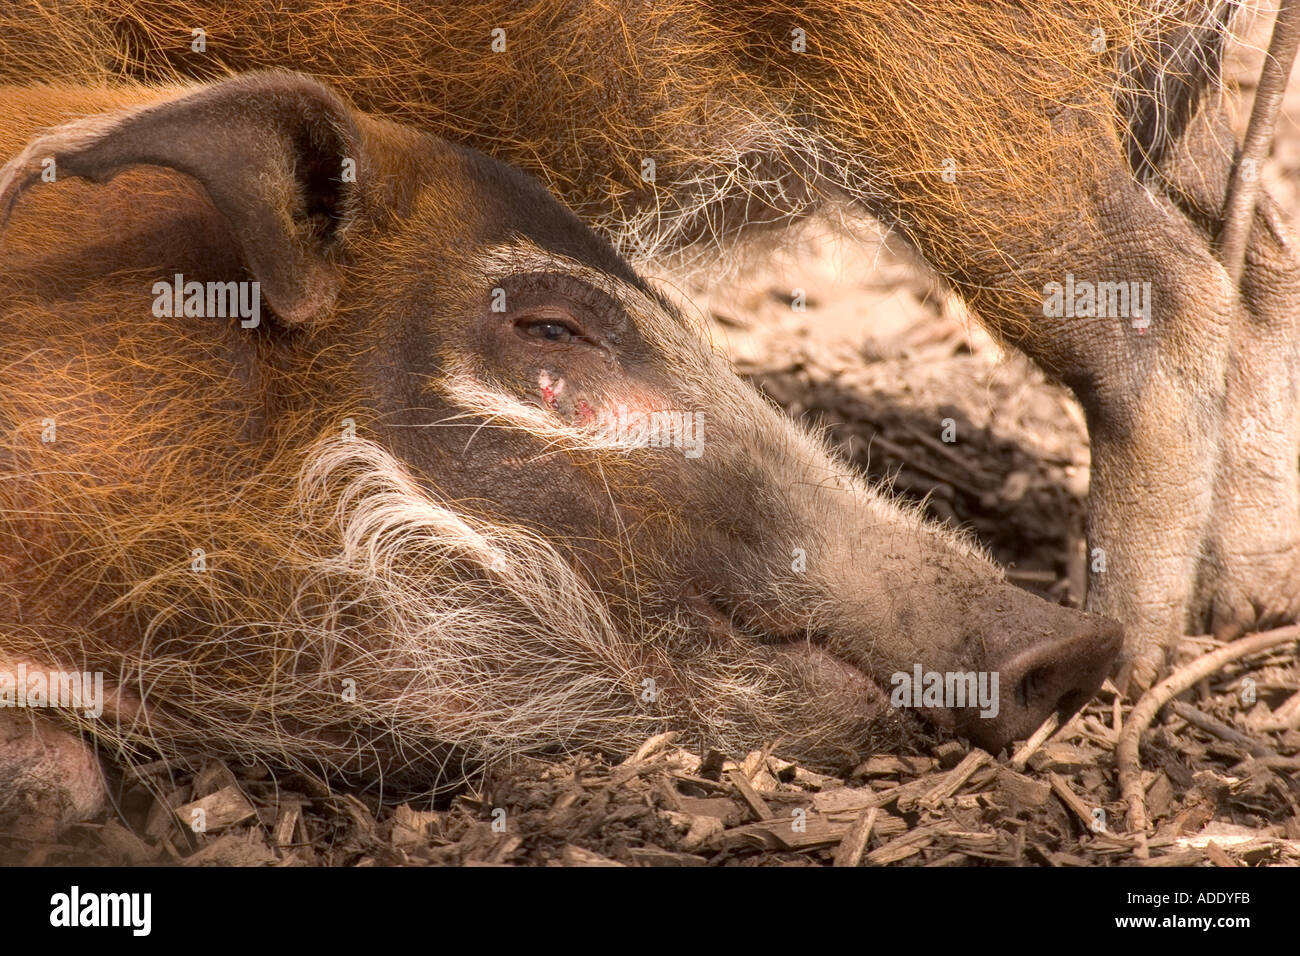 Red River Hog Stock Photo